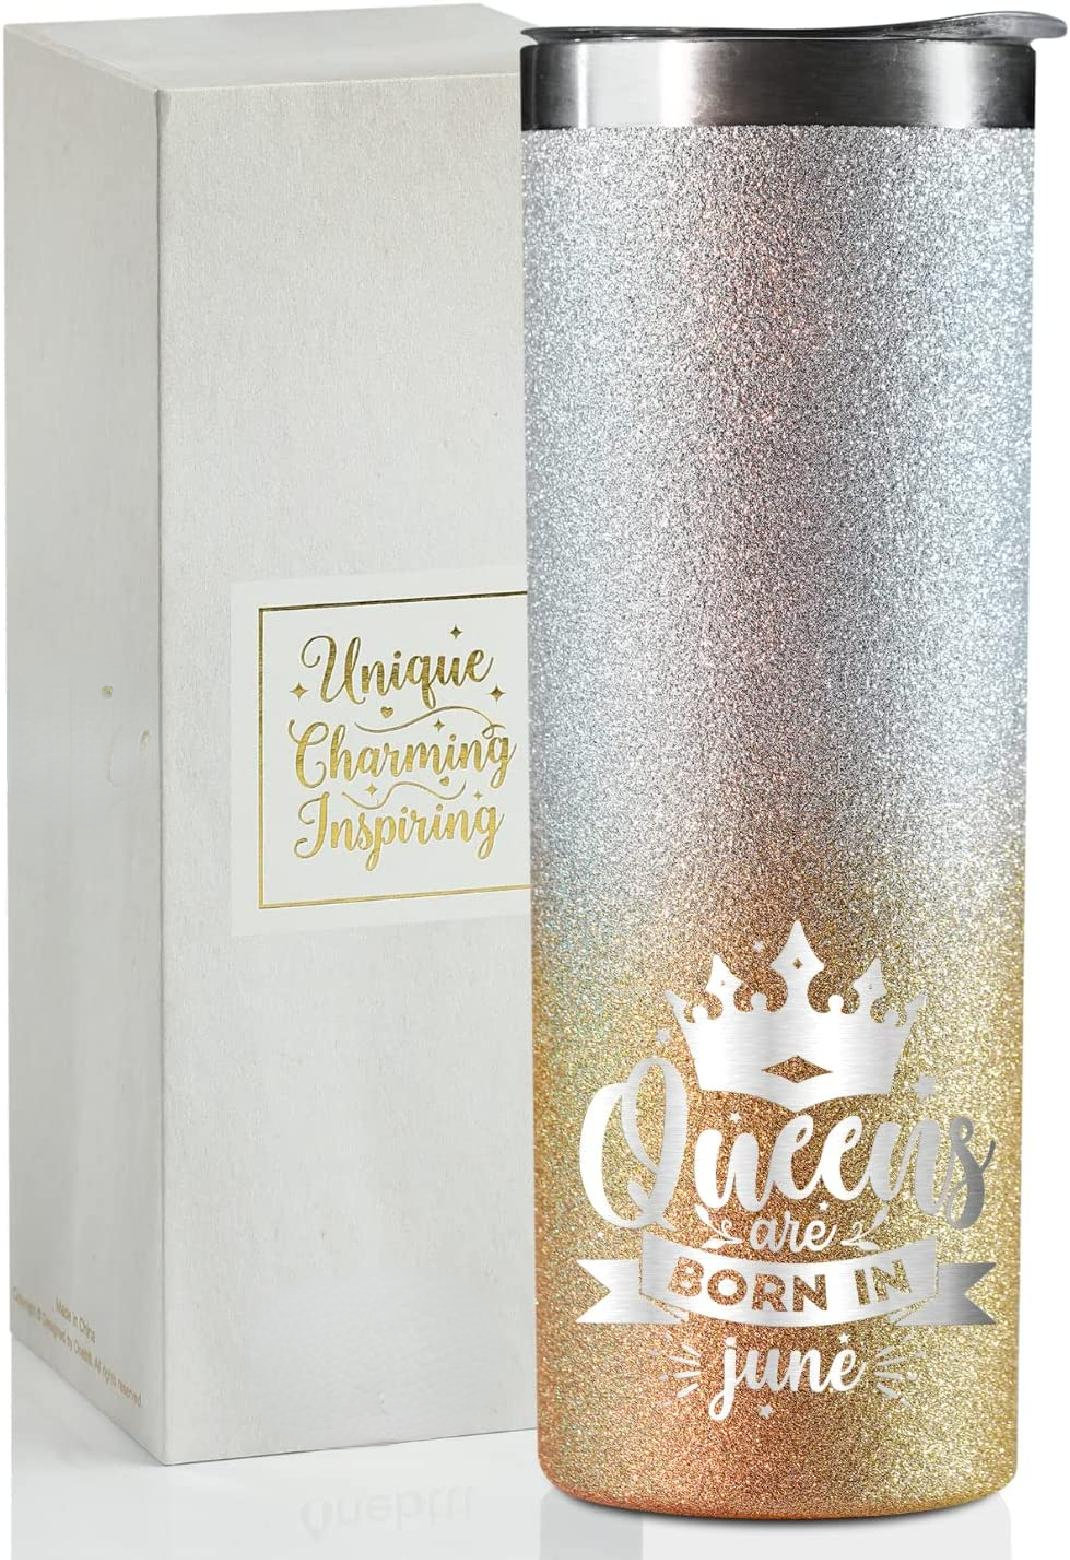 Orchids Aquae 20oz. Insulated Stainless Steel Water Bottle